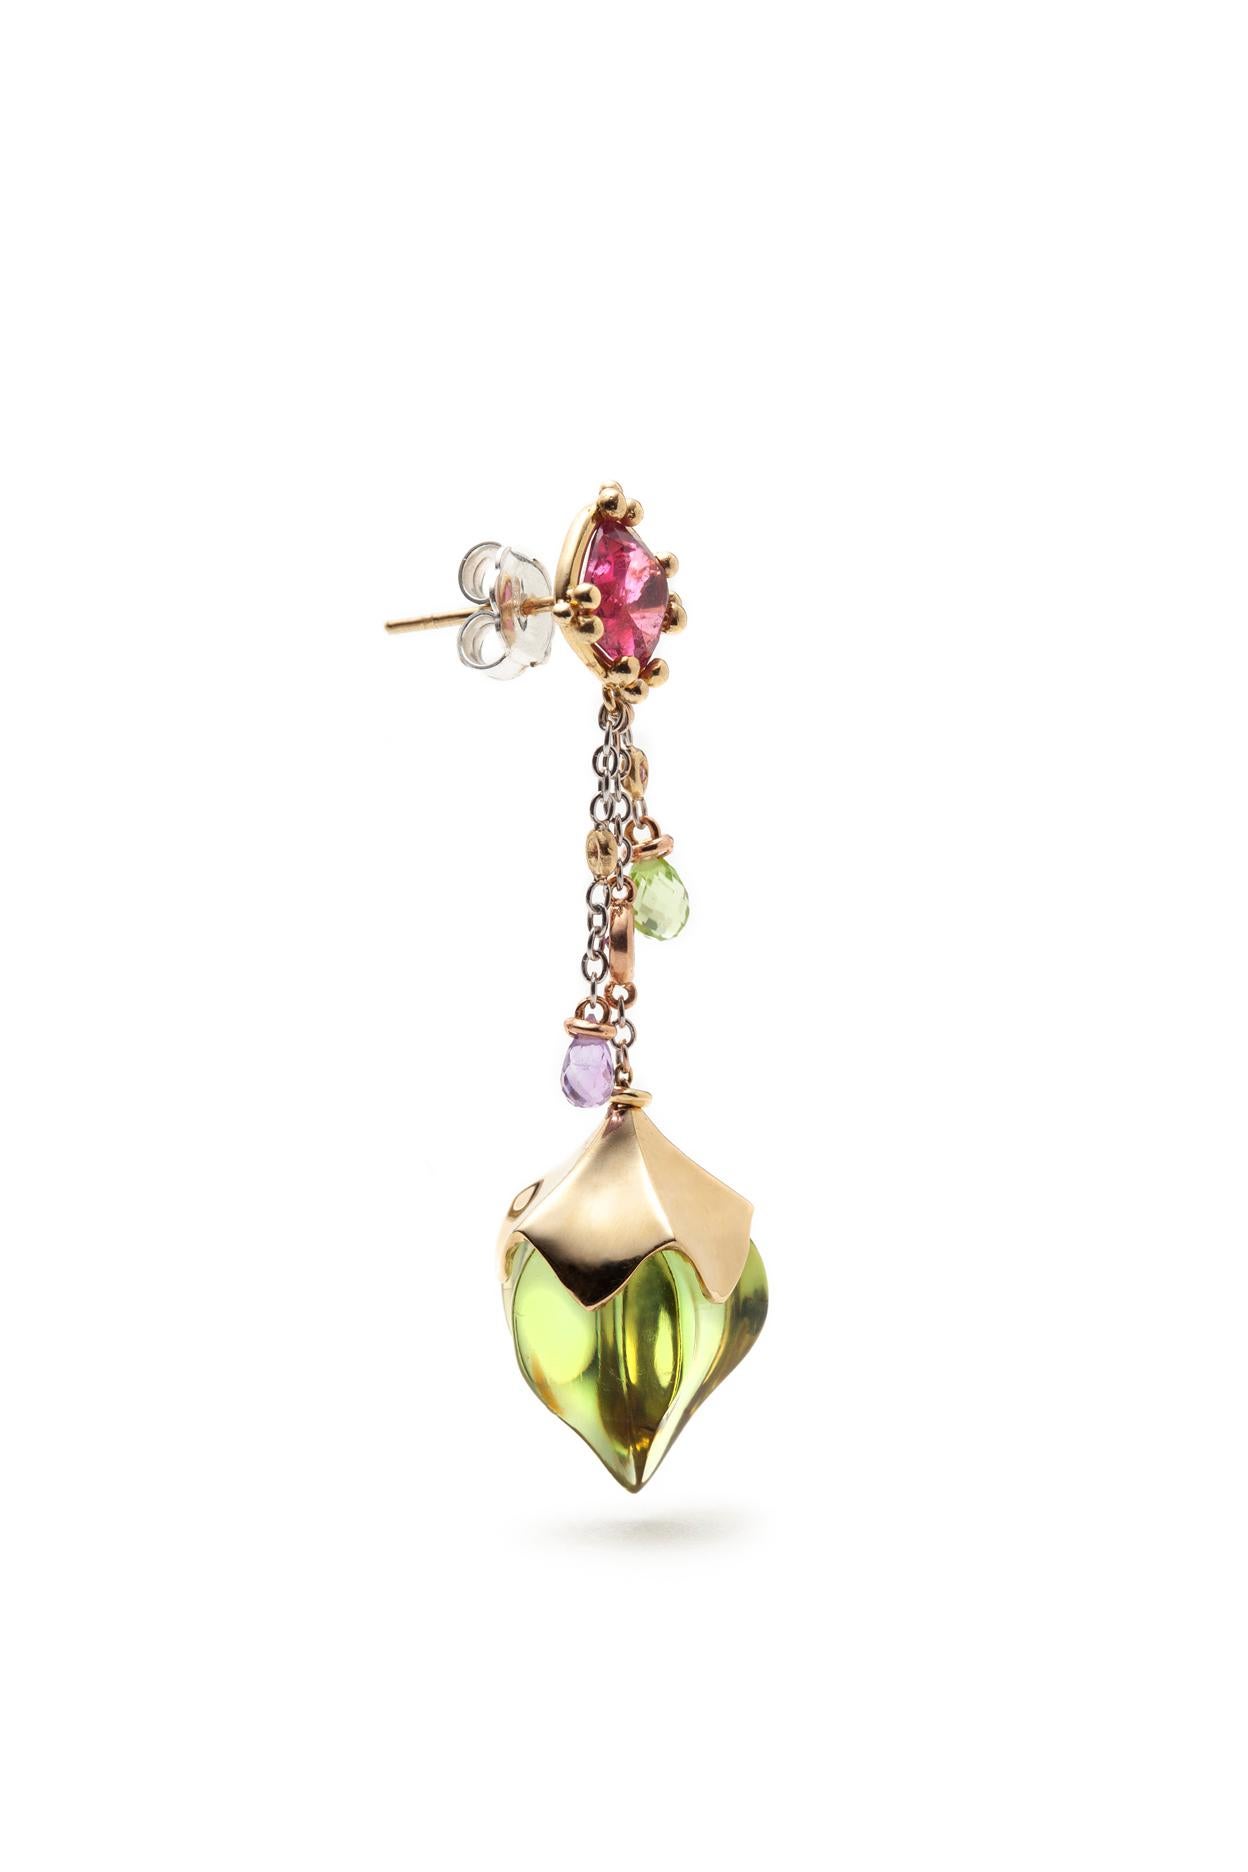 The ESTIVA earrings are made from 18K yellow, white and pink gold. Fancy cut green amber mounted in yellow gold flower cup settings hangs from cushion cut pink tourmalines. White gold chains adorned with amethyst and peridot briolettes; and faceted